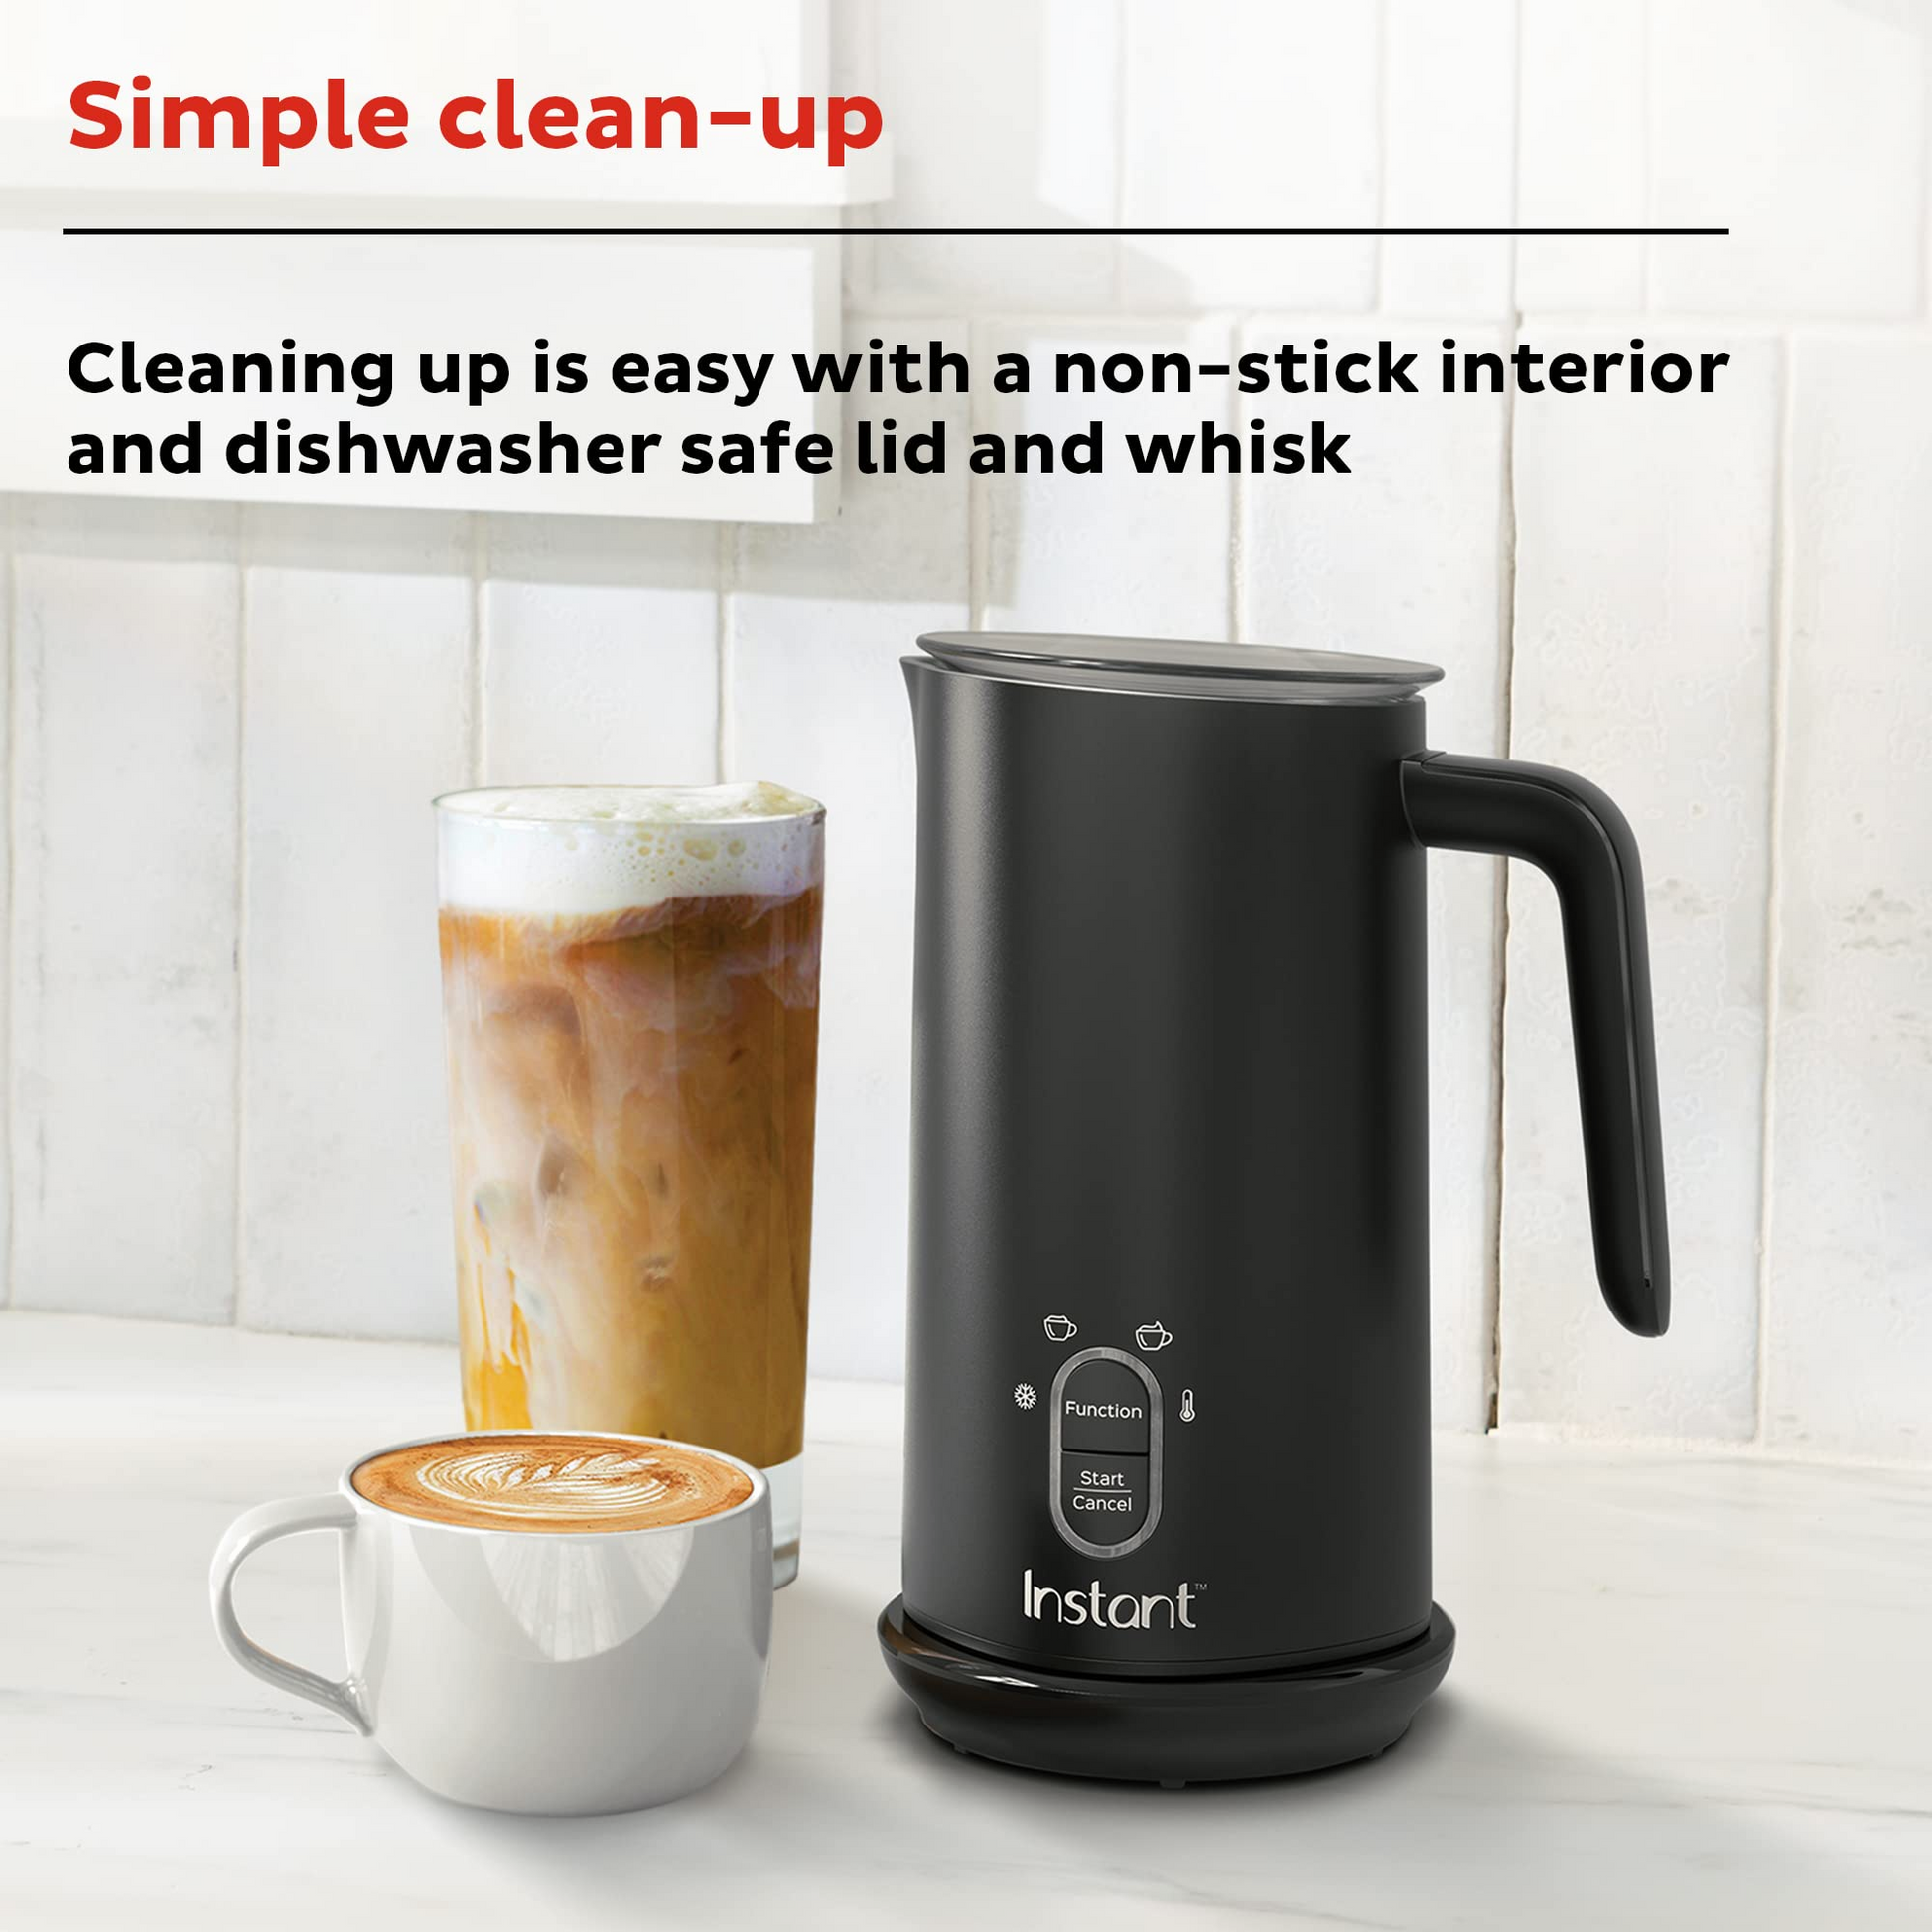 Milk Frother 4 in 1 Electric Milk Steamer Automatic Hot & Cold Foam Maker and Milk Warmer for Latte, Cappuccinos, Macchiato, Hot Chocolate Milk